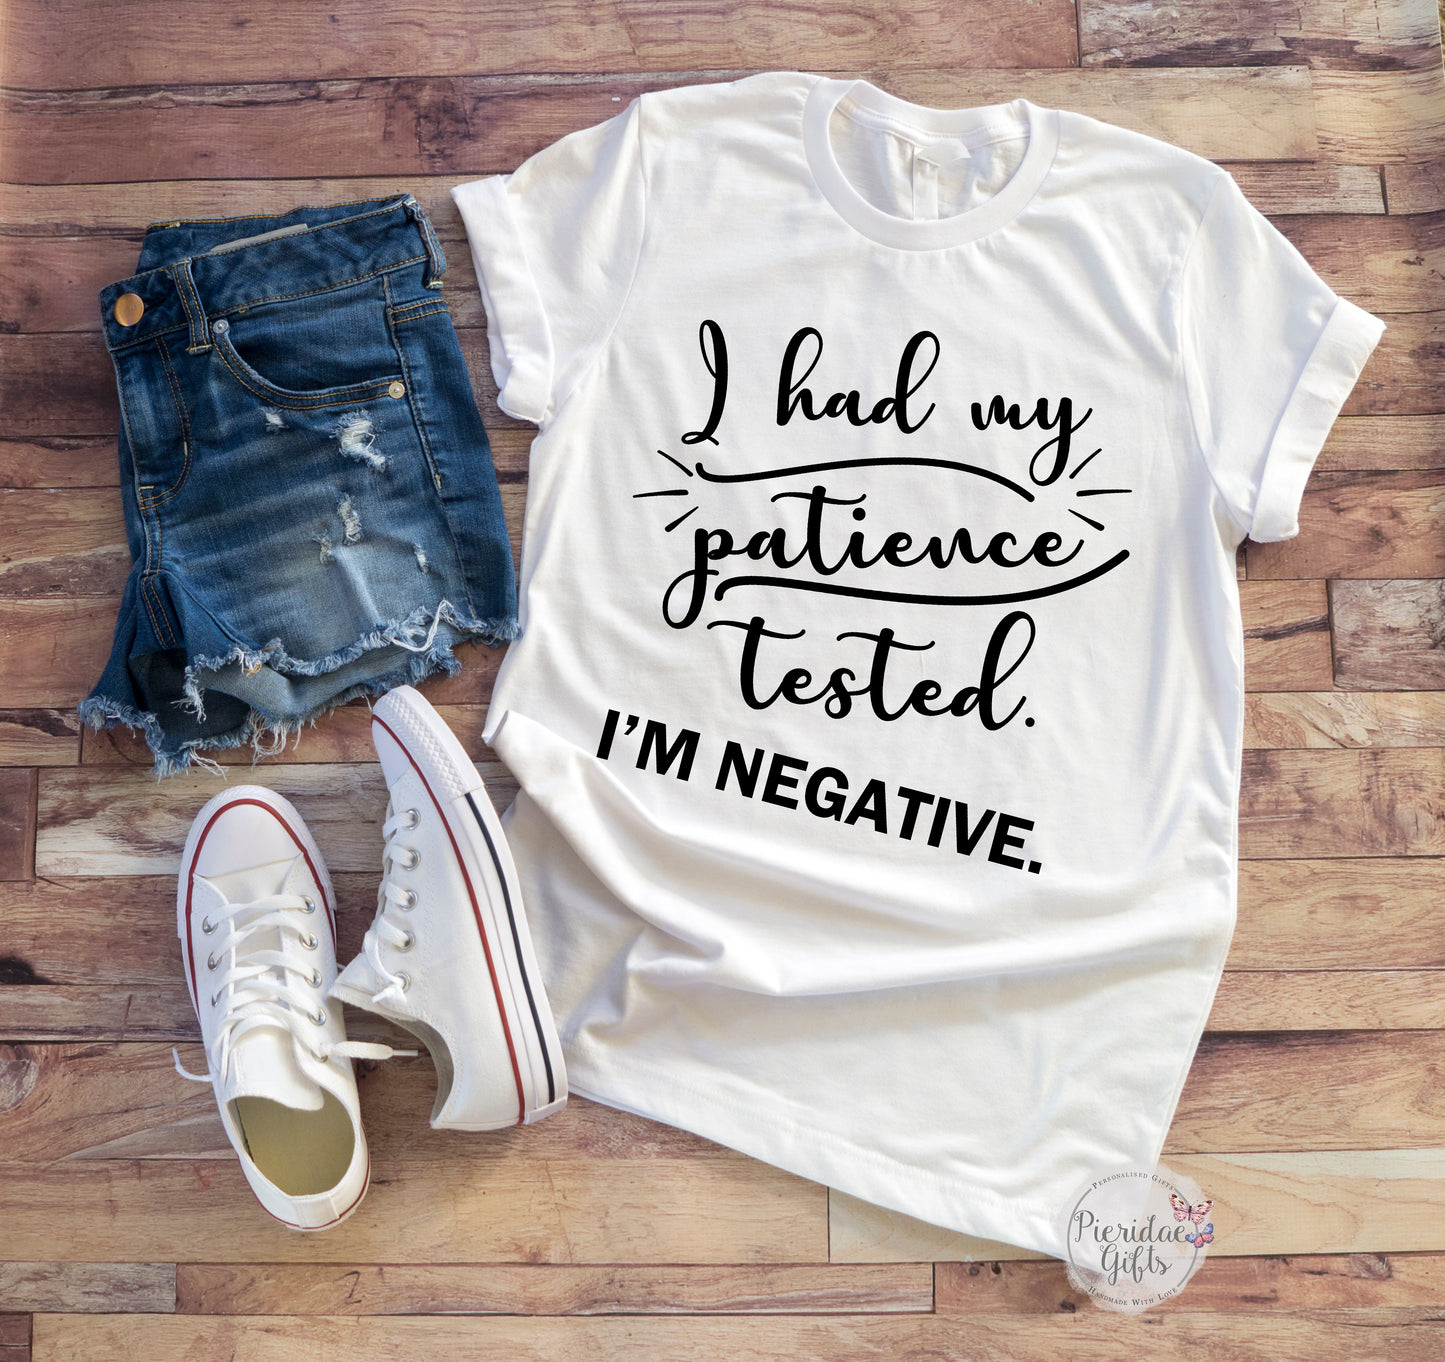 My Patience has been tested T shirt